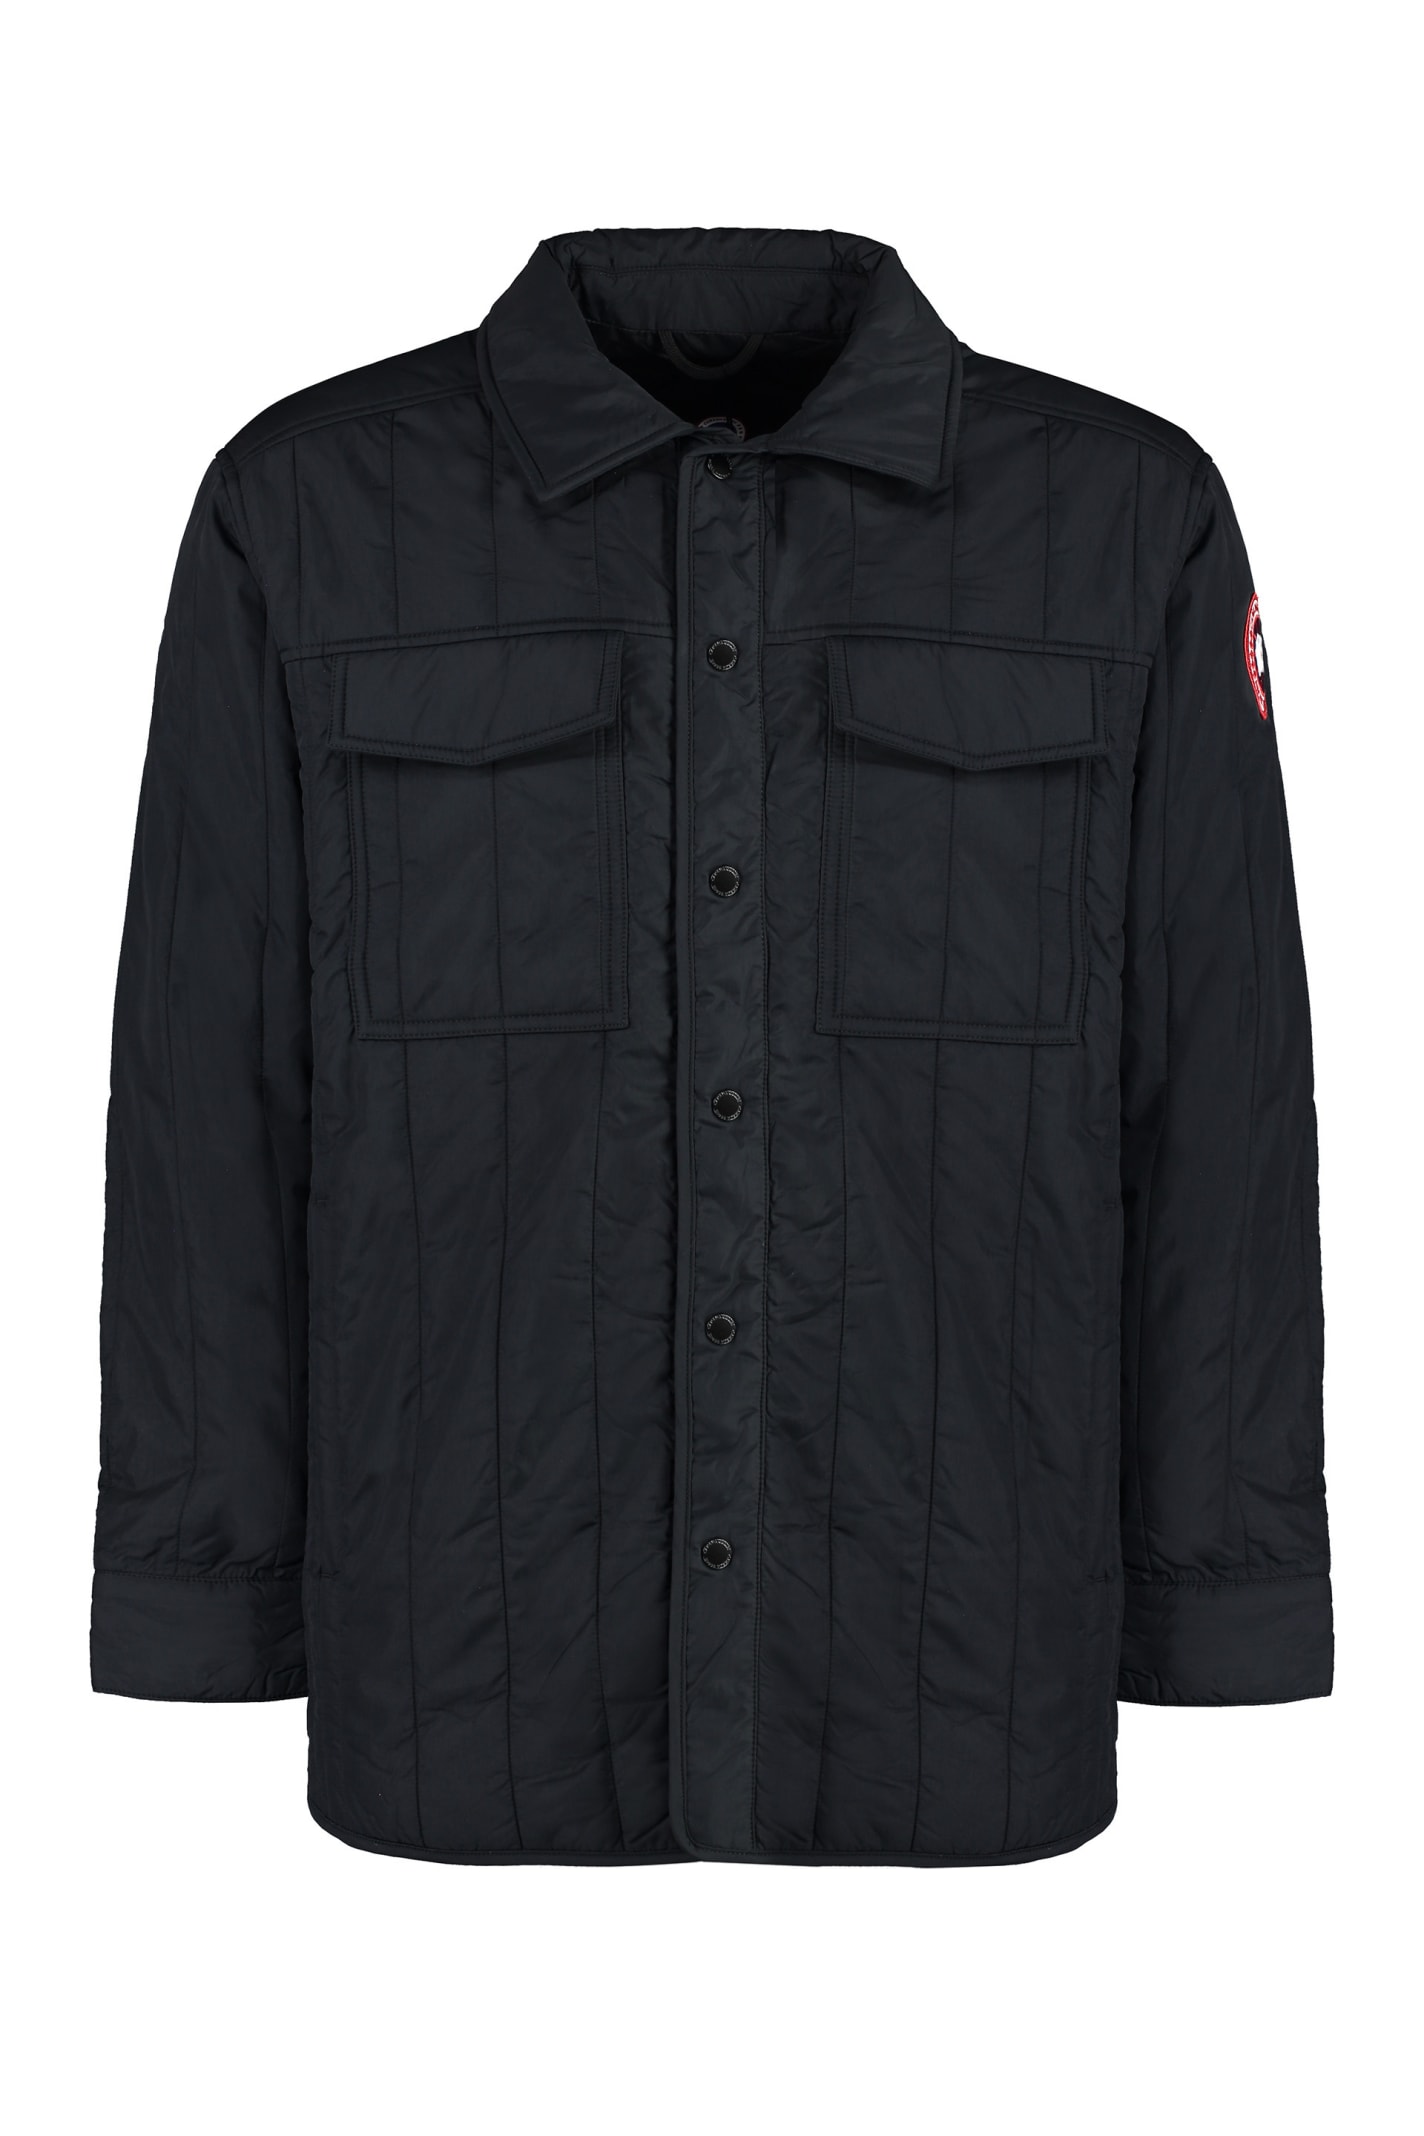 CANADA GOOSE CARLYLE TECHNICAL FABRIC OVERSHIRT